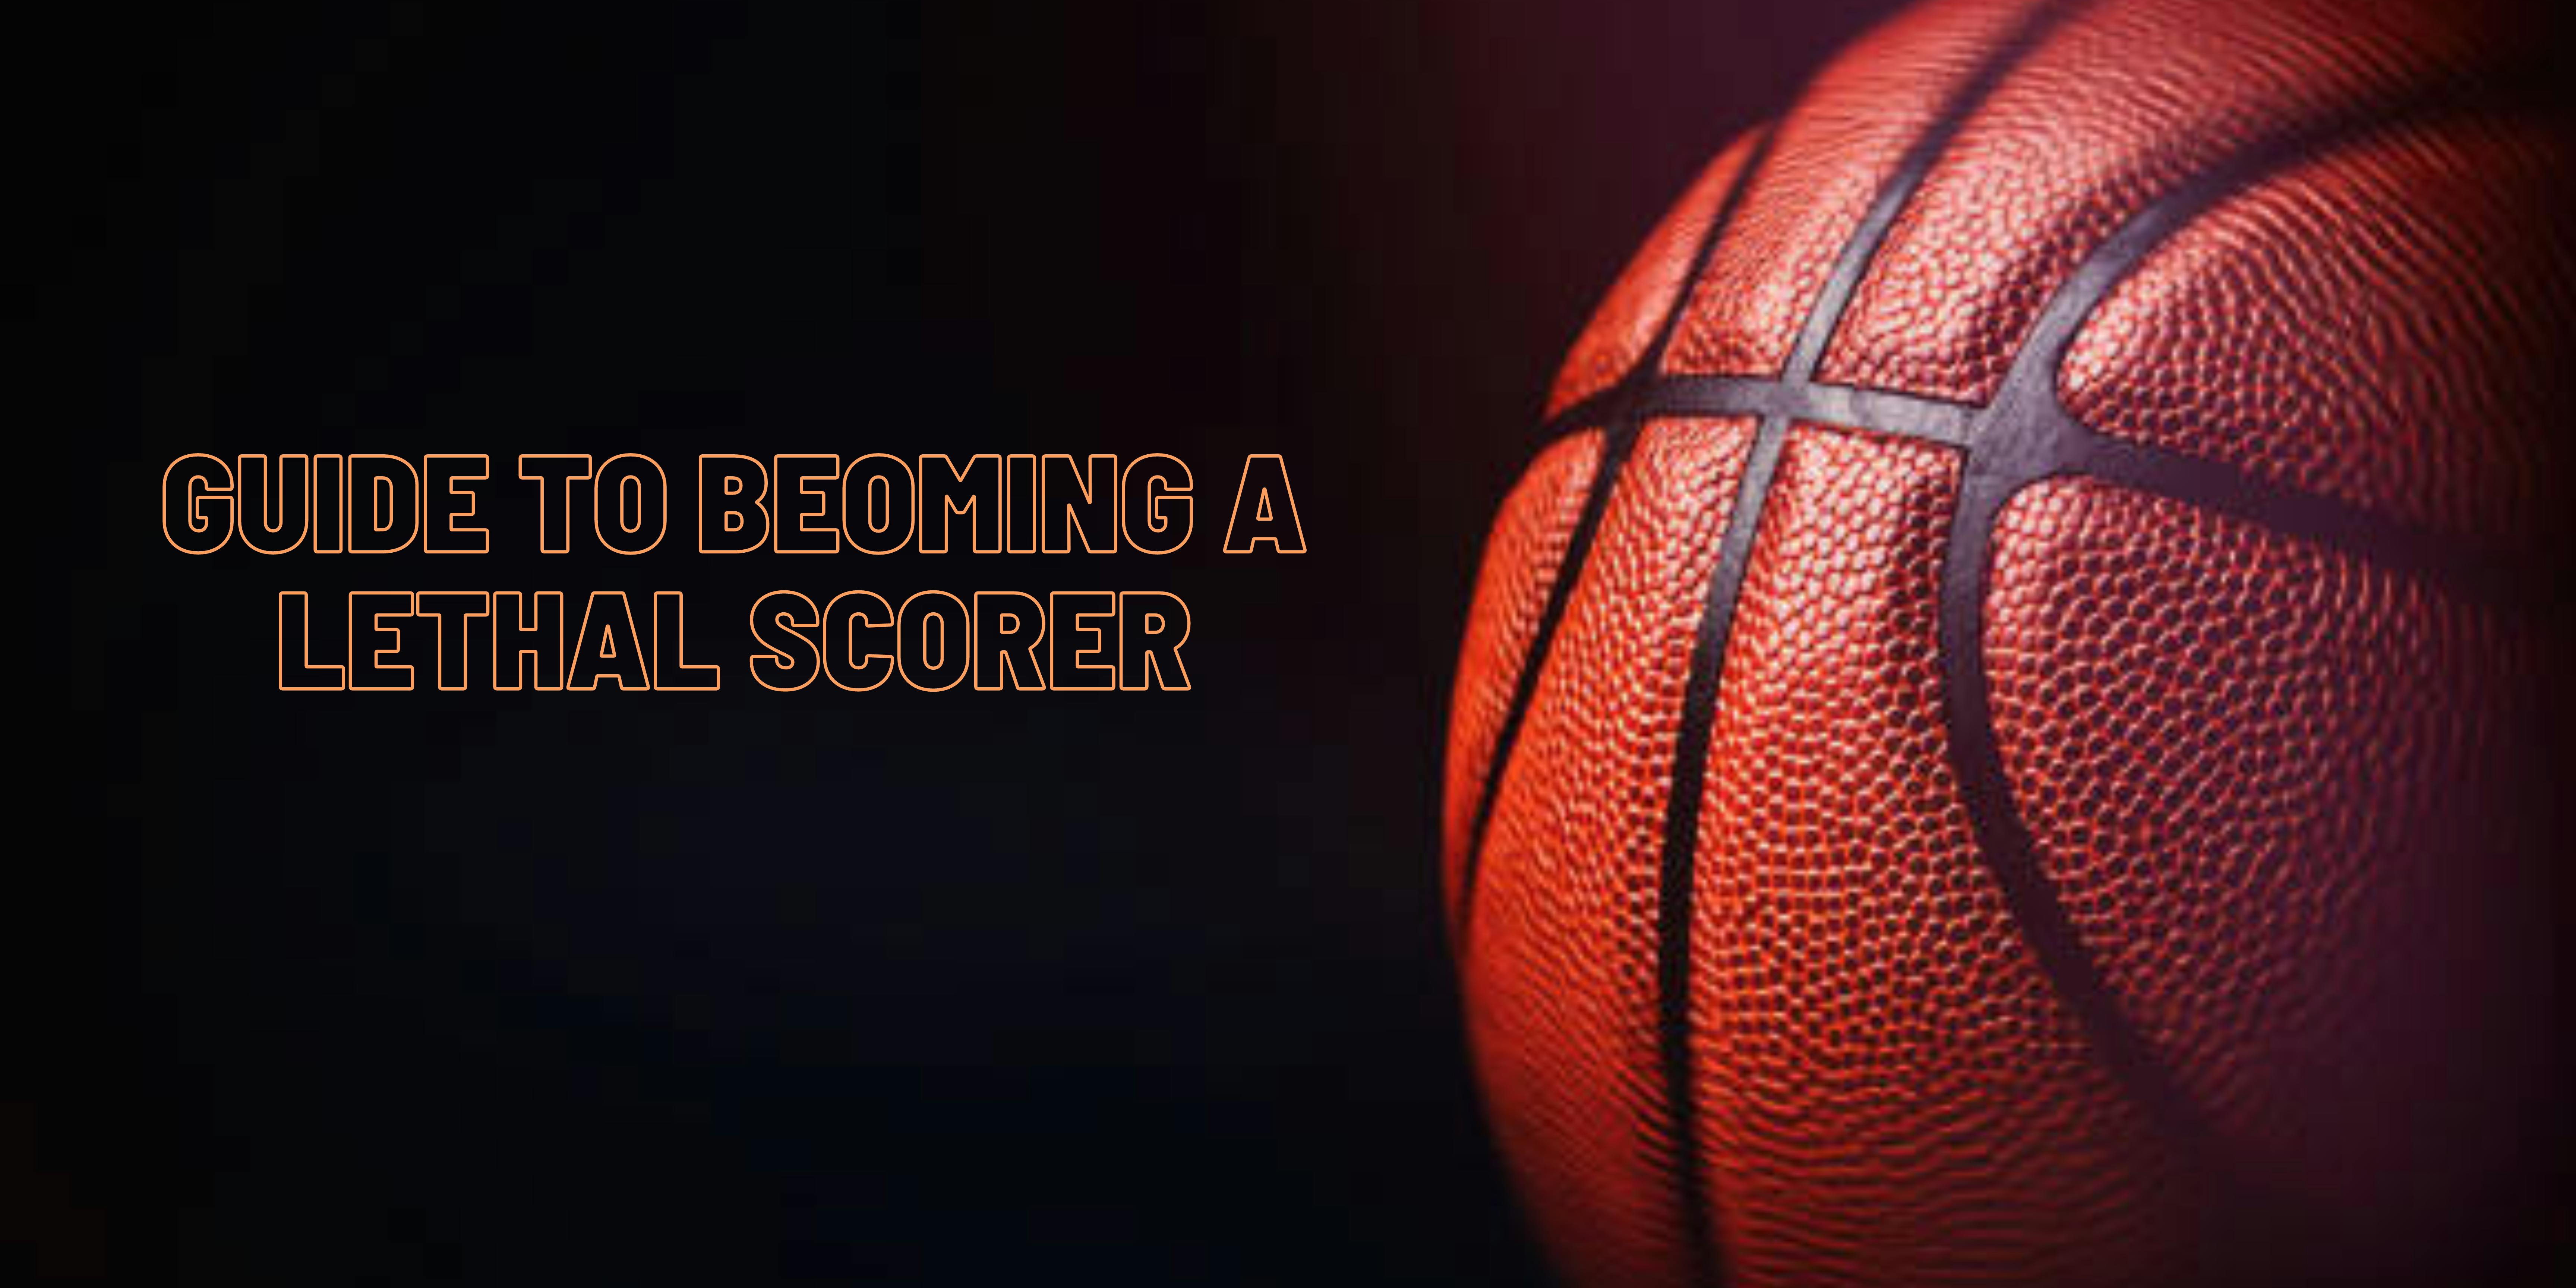 Guide to Becoming a Lethal Scorer in Basketball